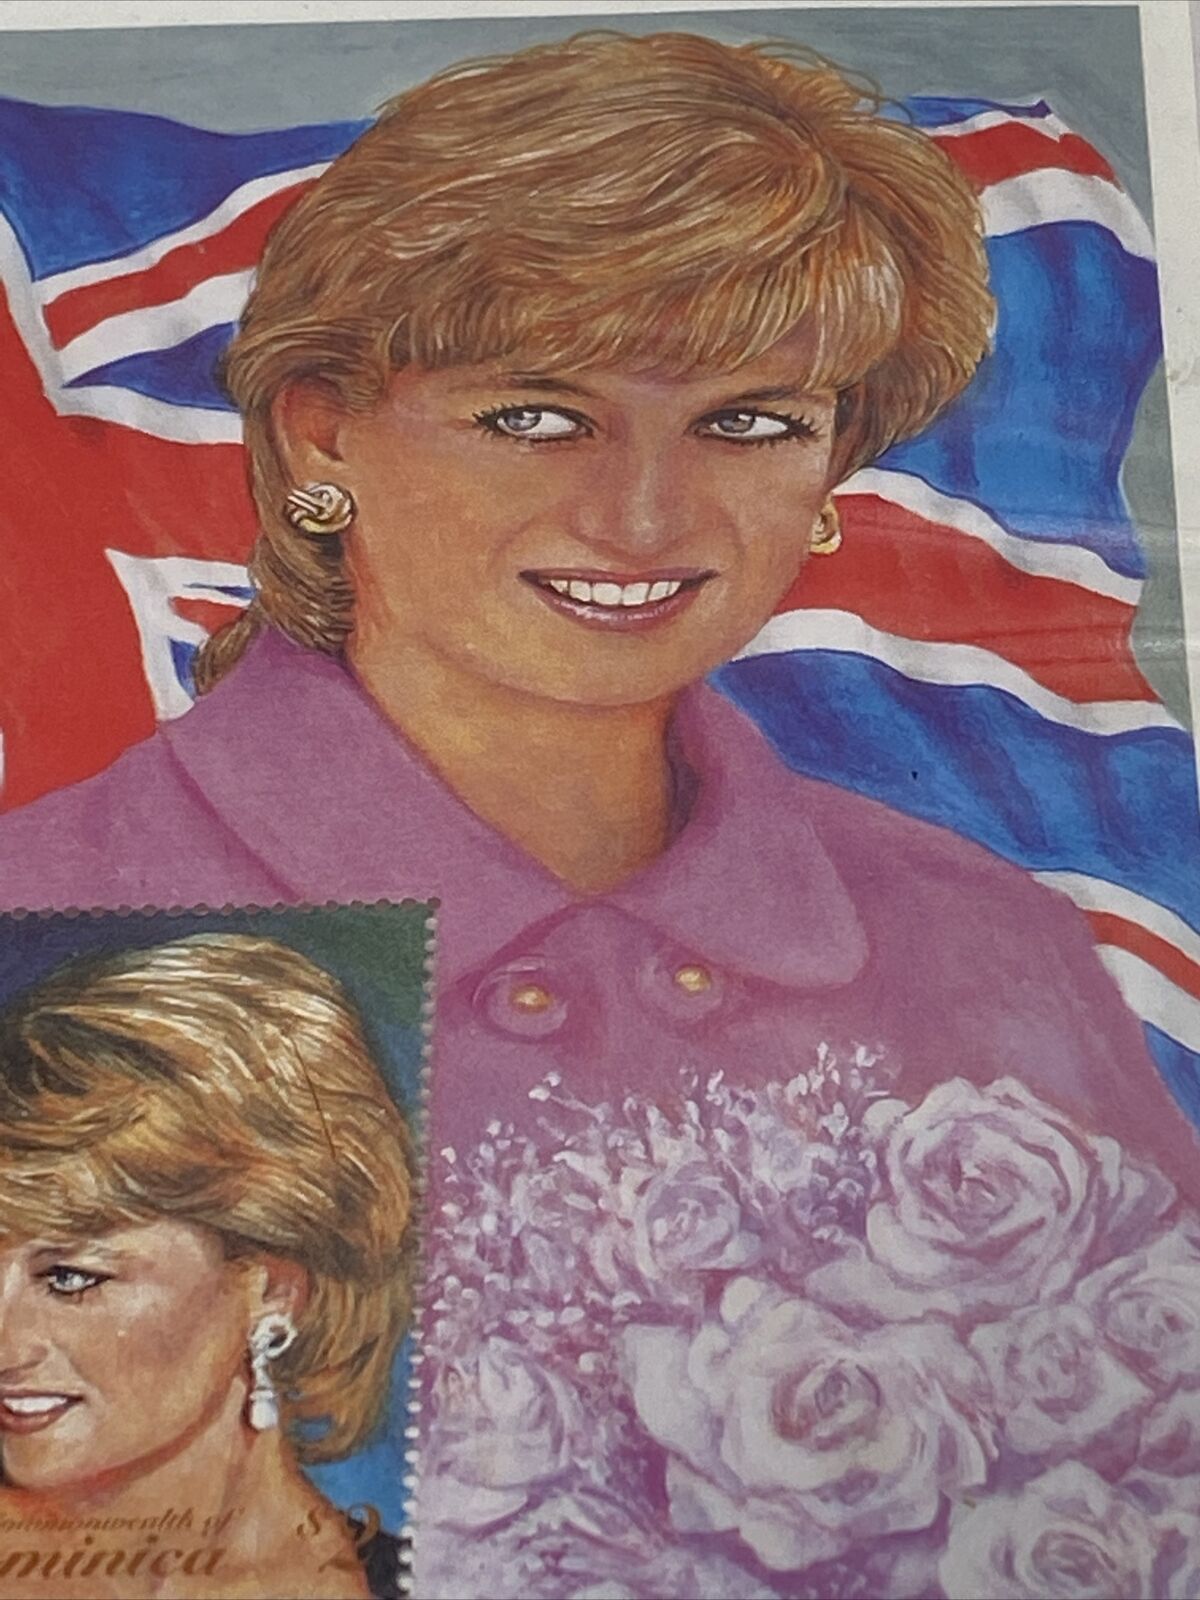 Princess Diana Royal Portraits Plate Block Of 4 Stamps Authenticity Certificate Без бренда - фотография #4